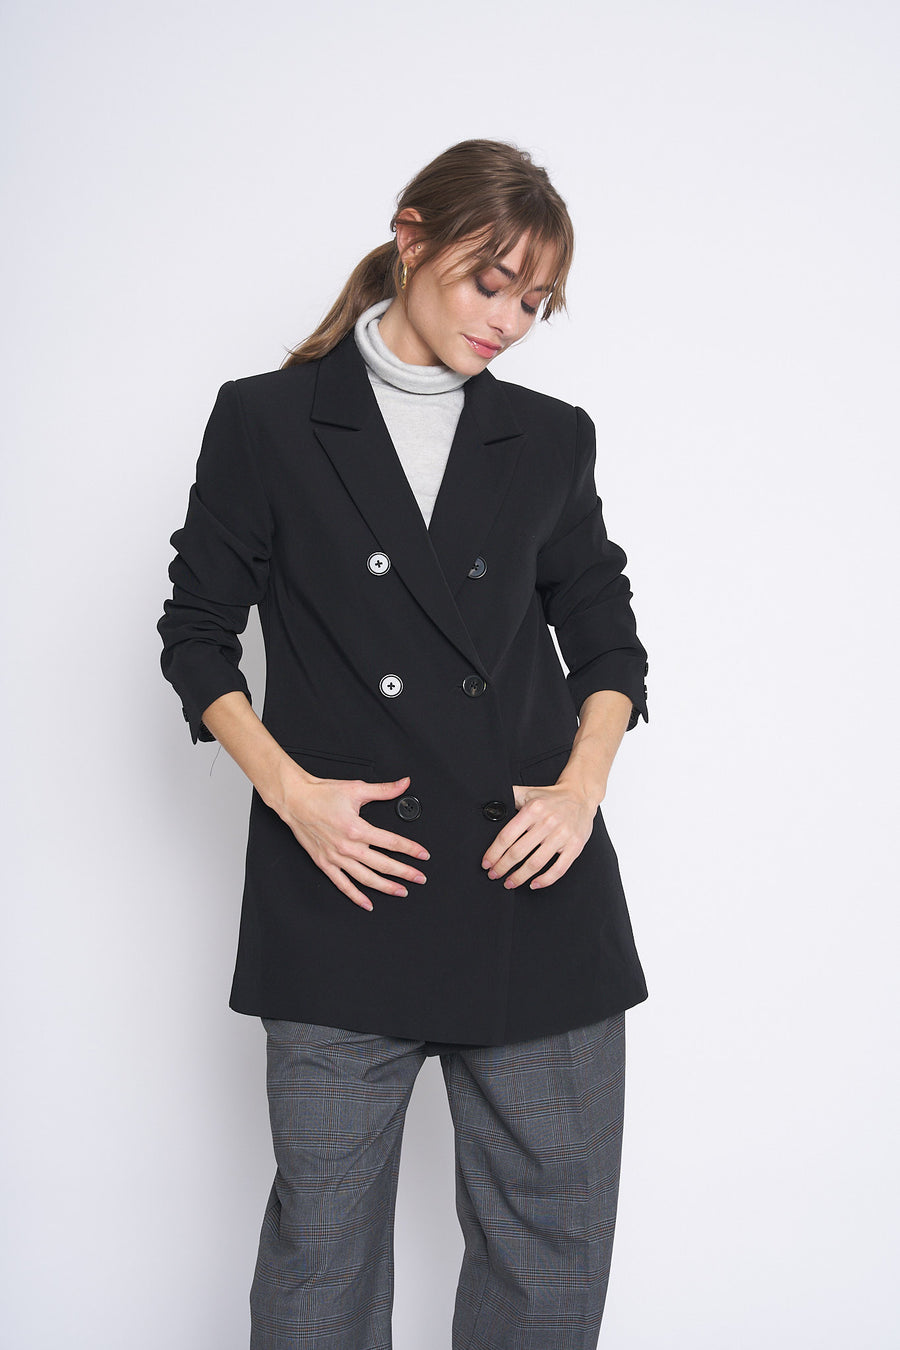 No Srcipt image - Images of 9 of 10 Double Breasted Staple Jacket Women's Workwear Office Wear Women's Fashion Sophisticated Style Chic Simple Classic Black Blazer Fall Jacket Fall Fashion Women's Outerwear Timeless Everyday Blazer Neutral Color The Emory Blazer In Black